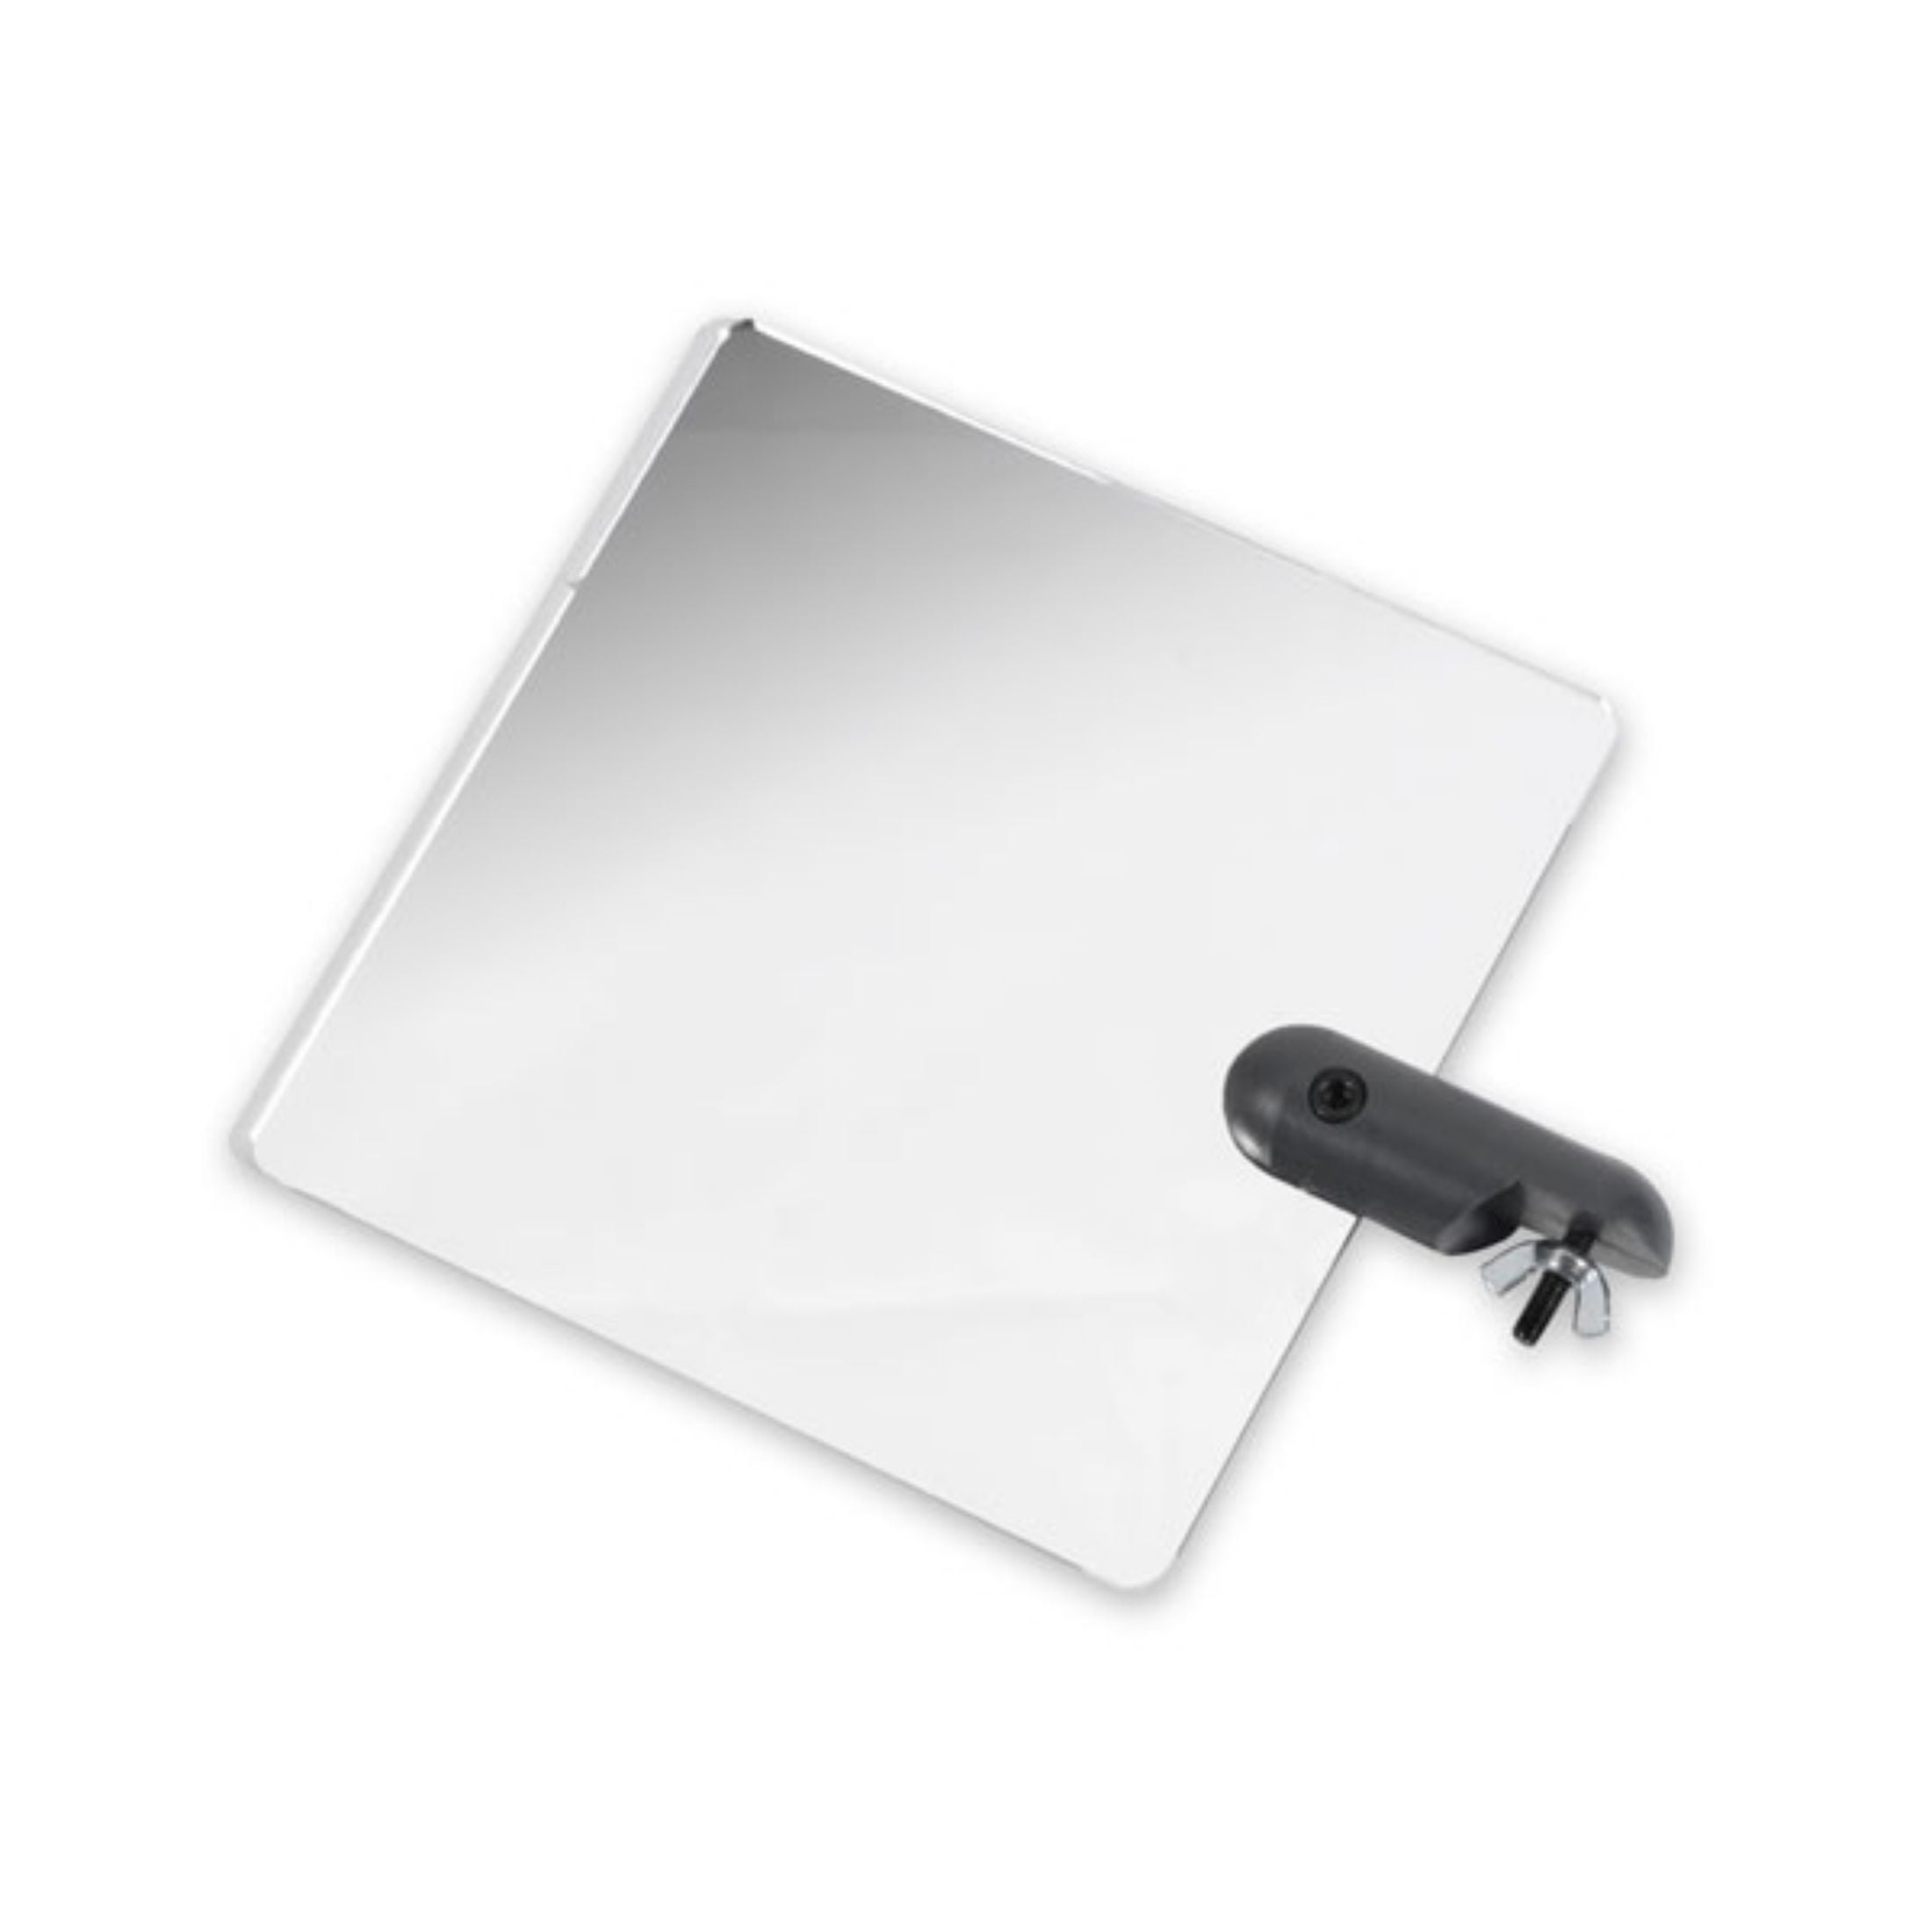 Telescoping Inspection Mirror 6 ft -18 ft Pole Extend A Vue 3.5 in x 6 in Mirror Lightweight Durable 